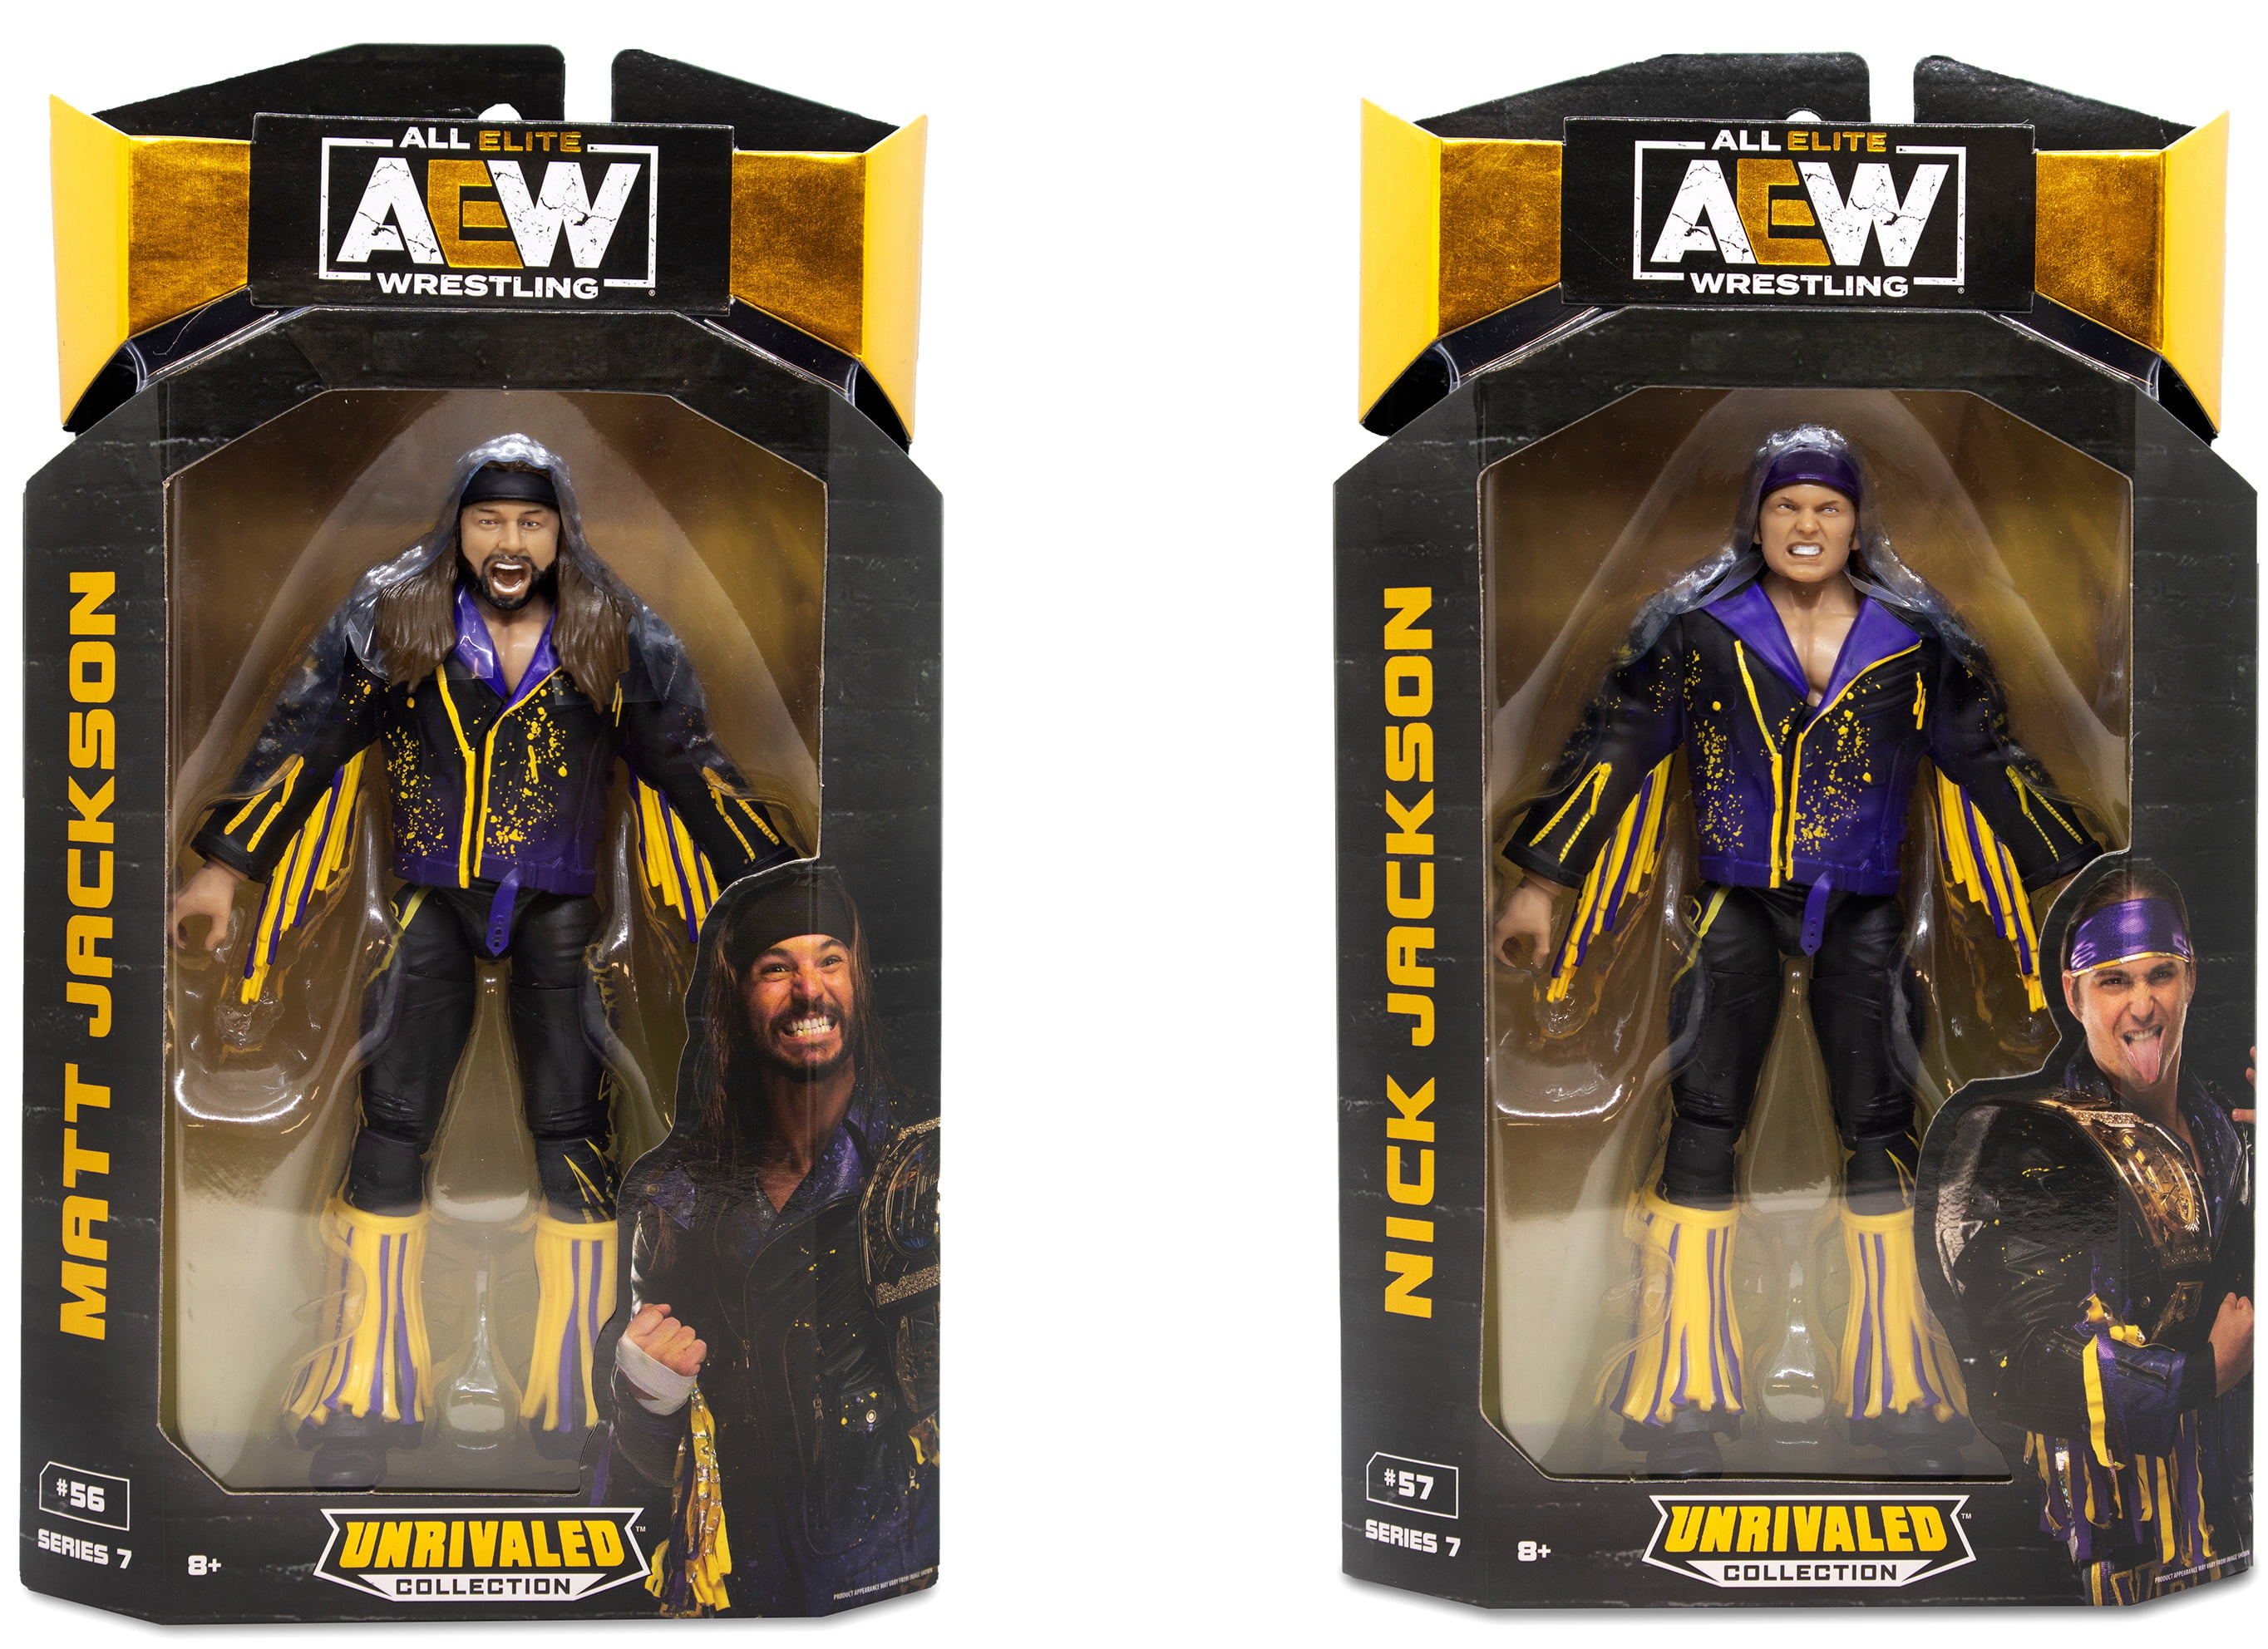 AEW Unrivaled Collection Matt Jackson 6.5 inch Action Figure for sale online 